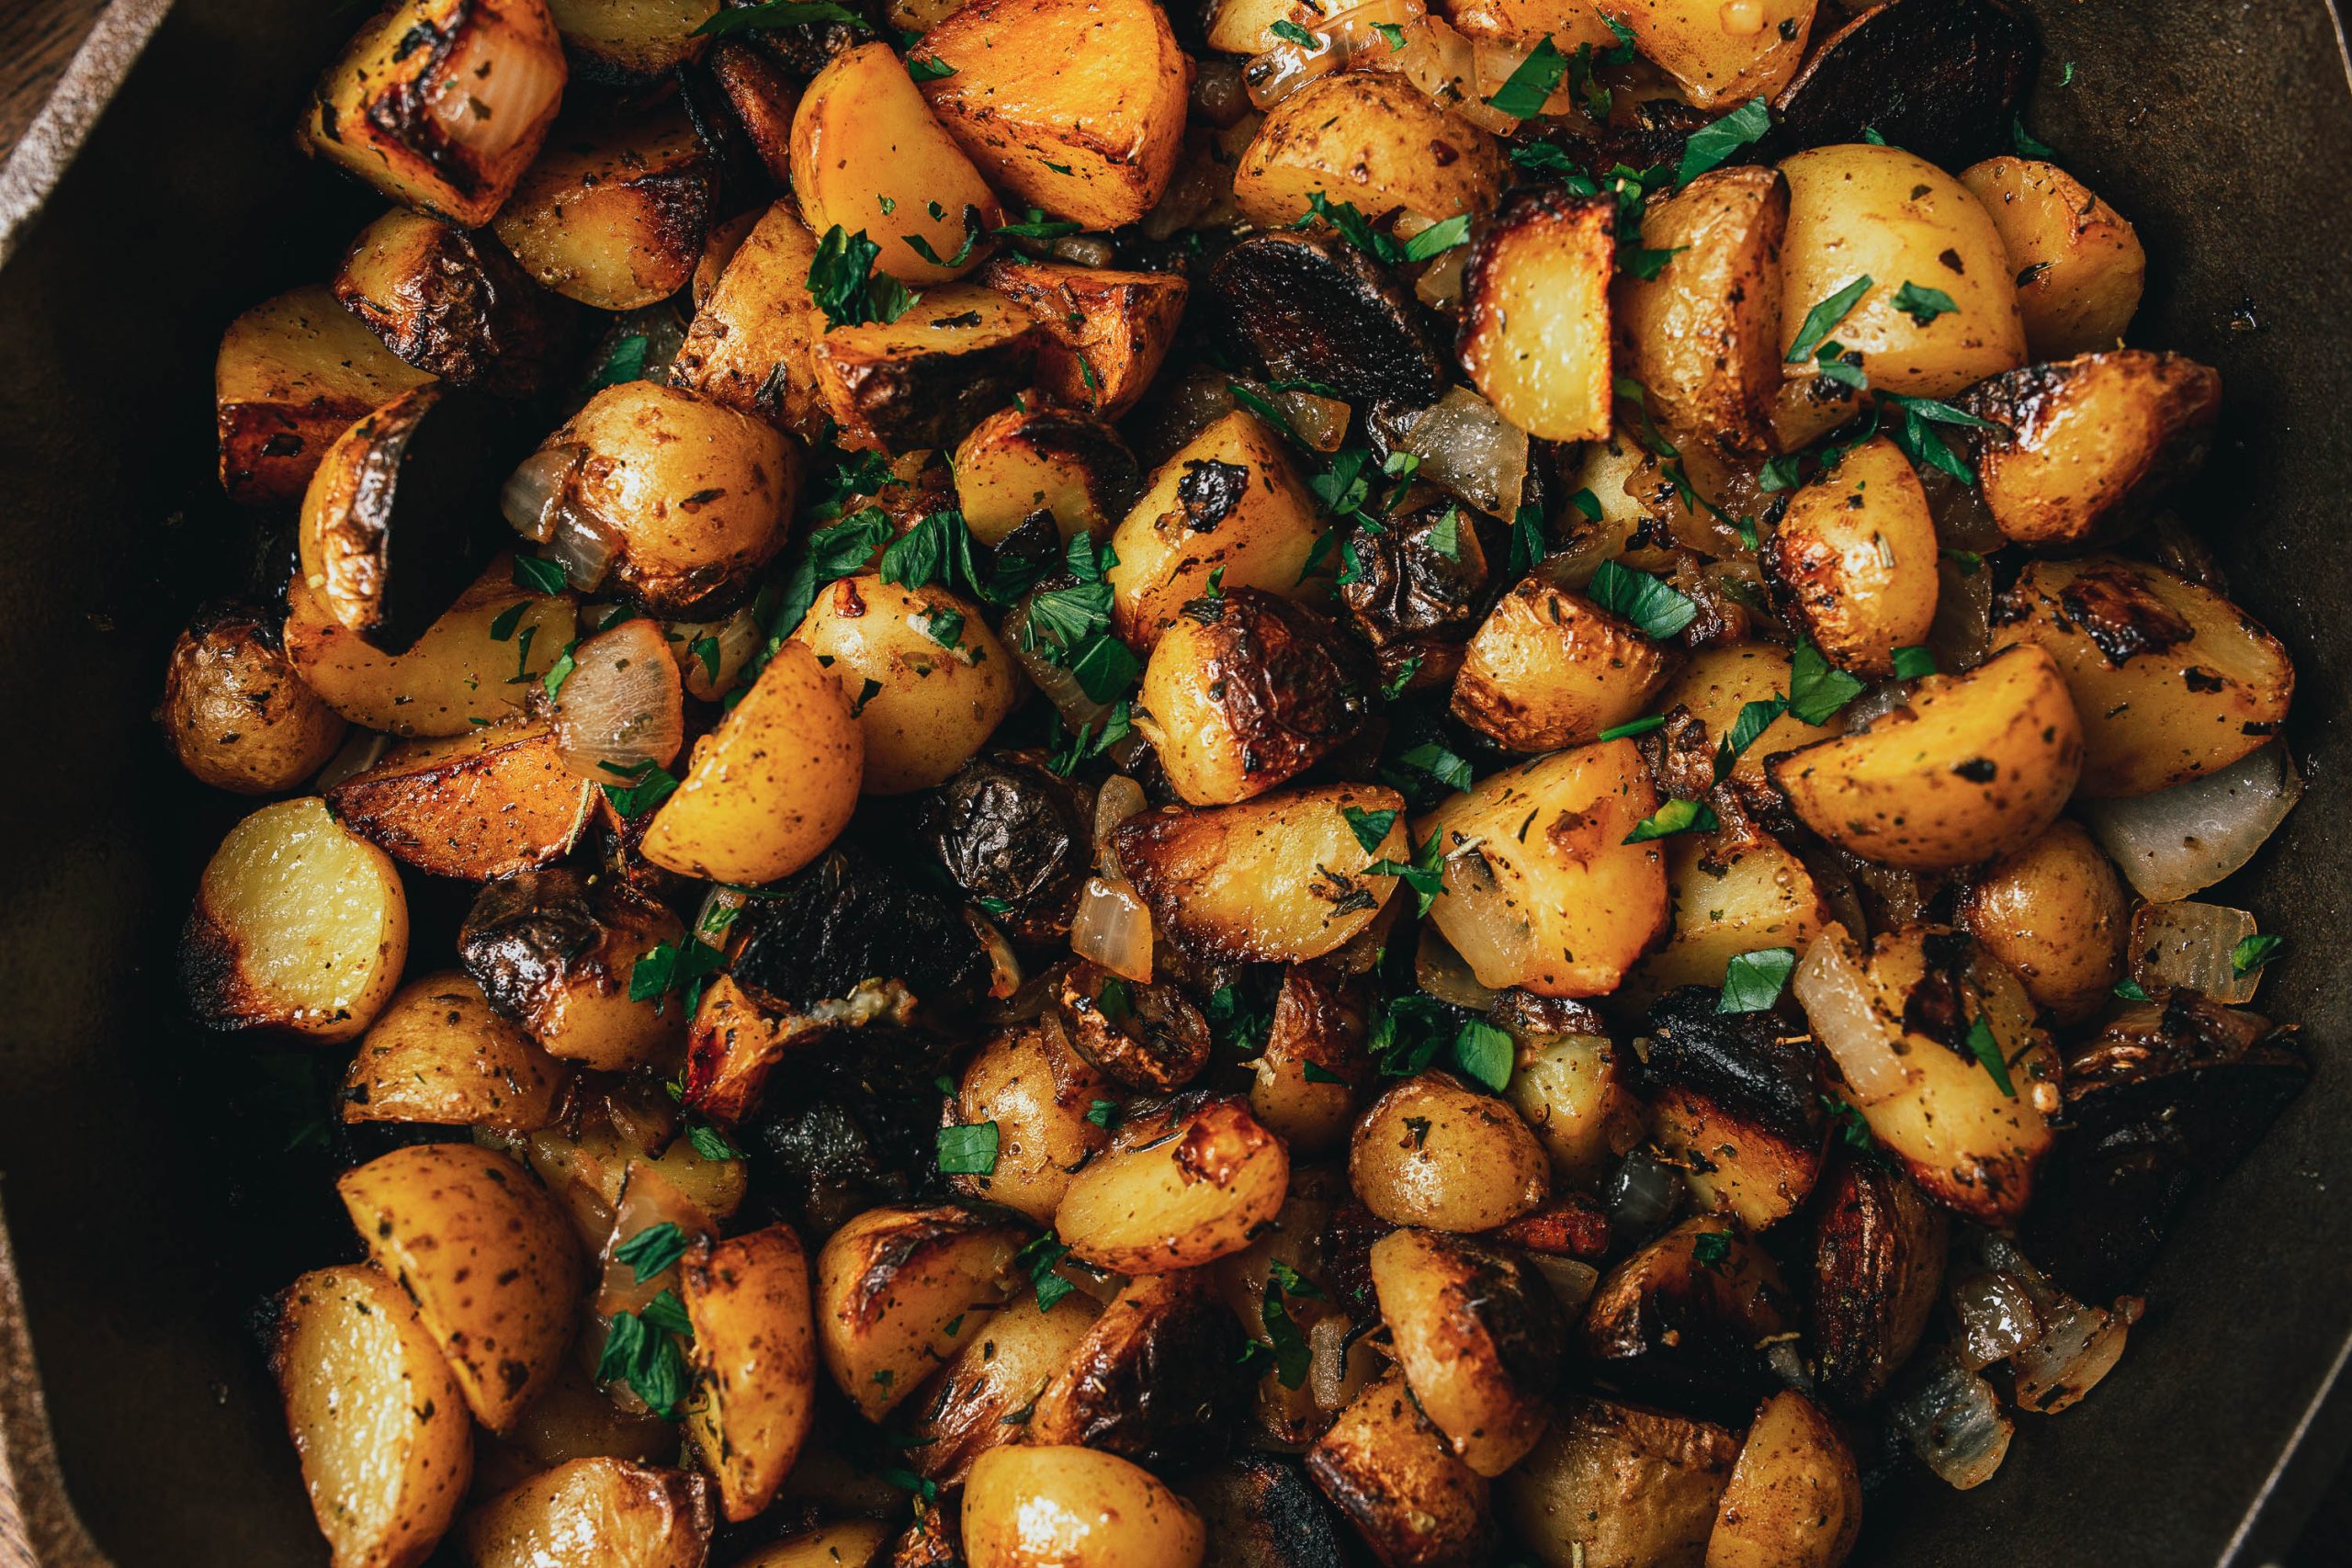 A close-up of seasoned roasted potatoes with charred edges, garnished with chopped fresh herbs. The potatoes appear crispy and golden brown.